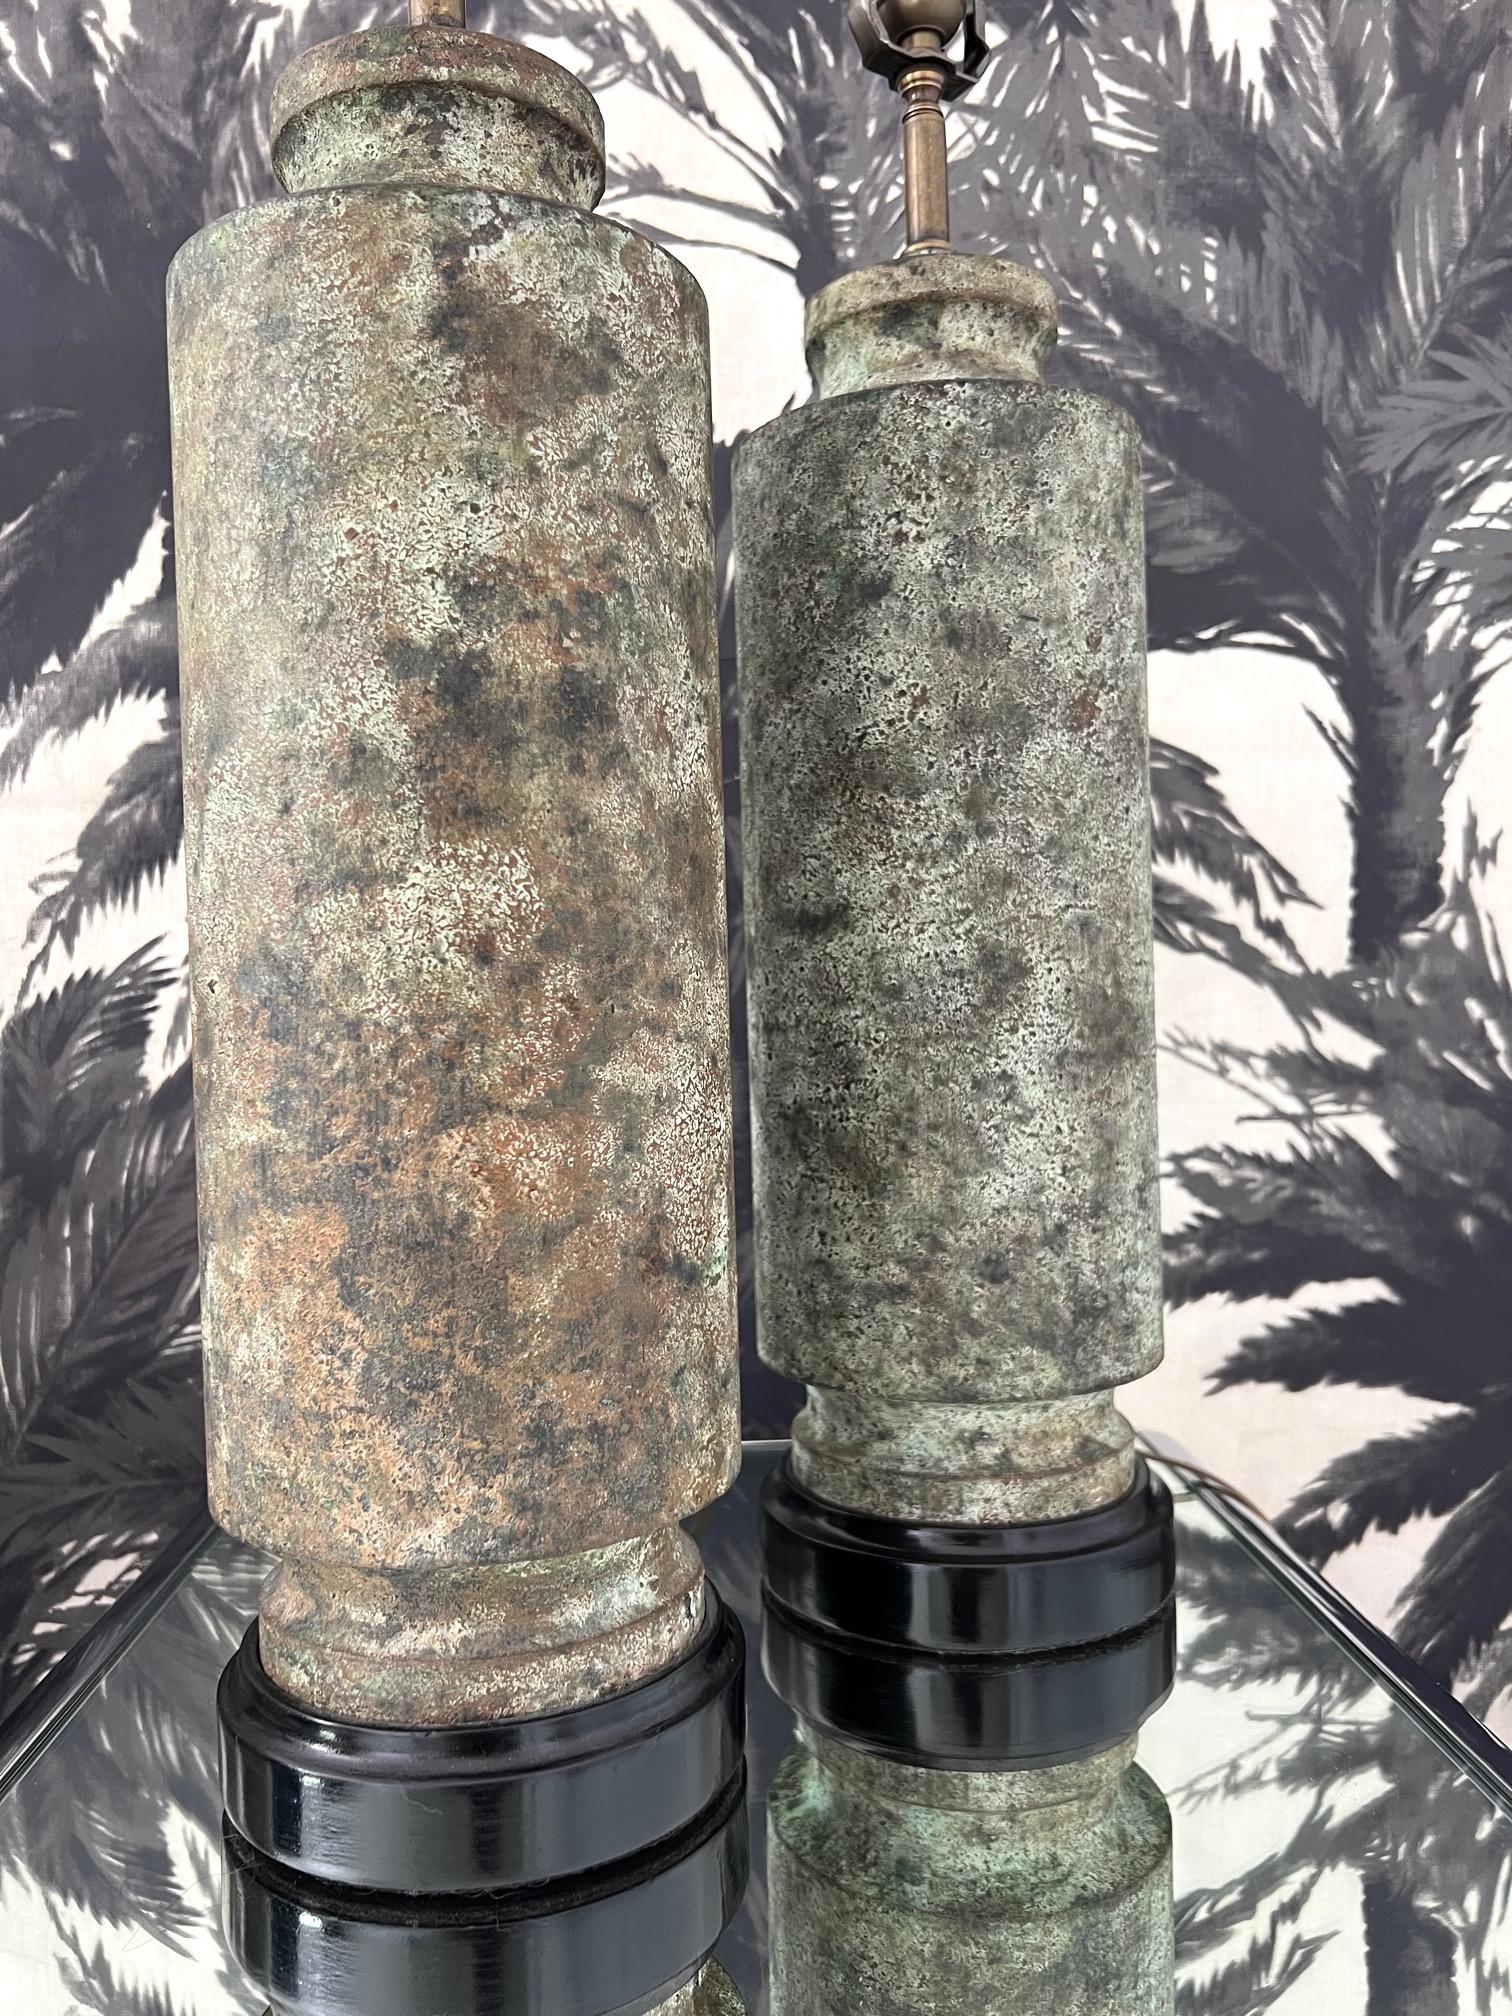 Pair of Pagoda Column Lamps with Verdigris Finish and Ebony Bases, 1960s For Sale 2